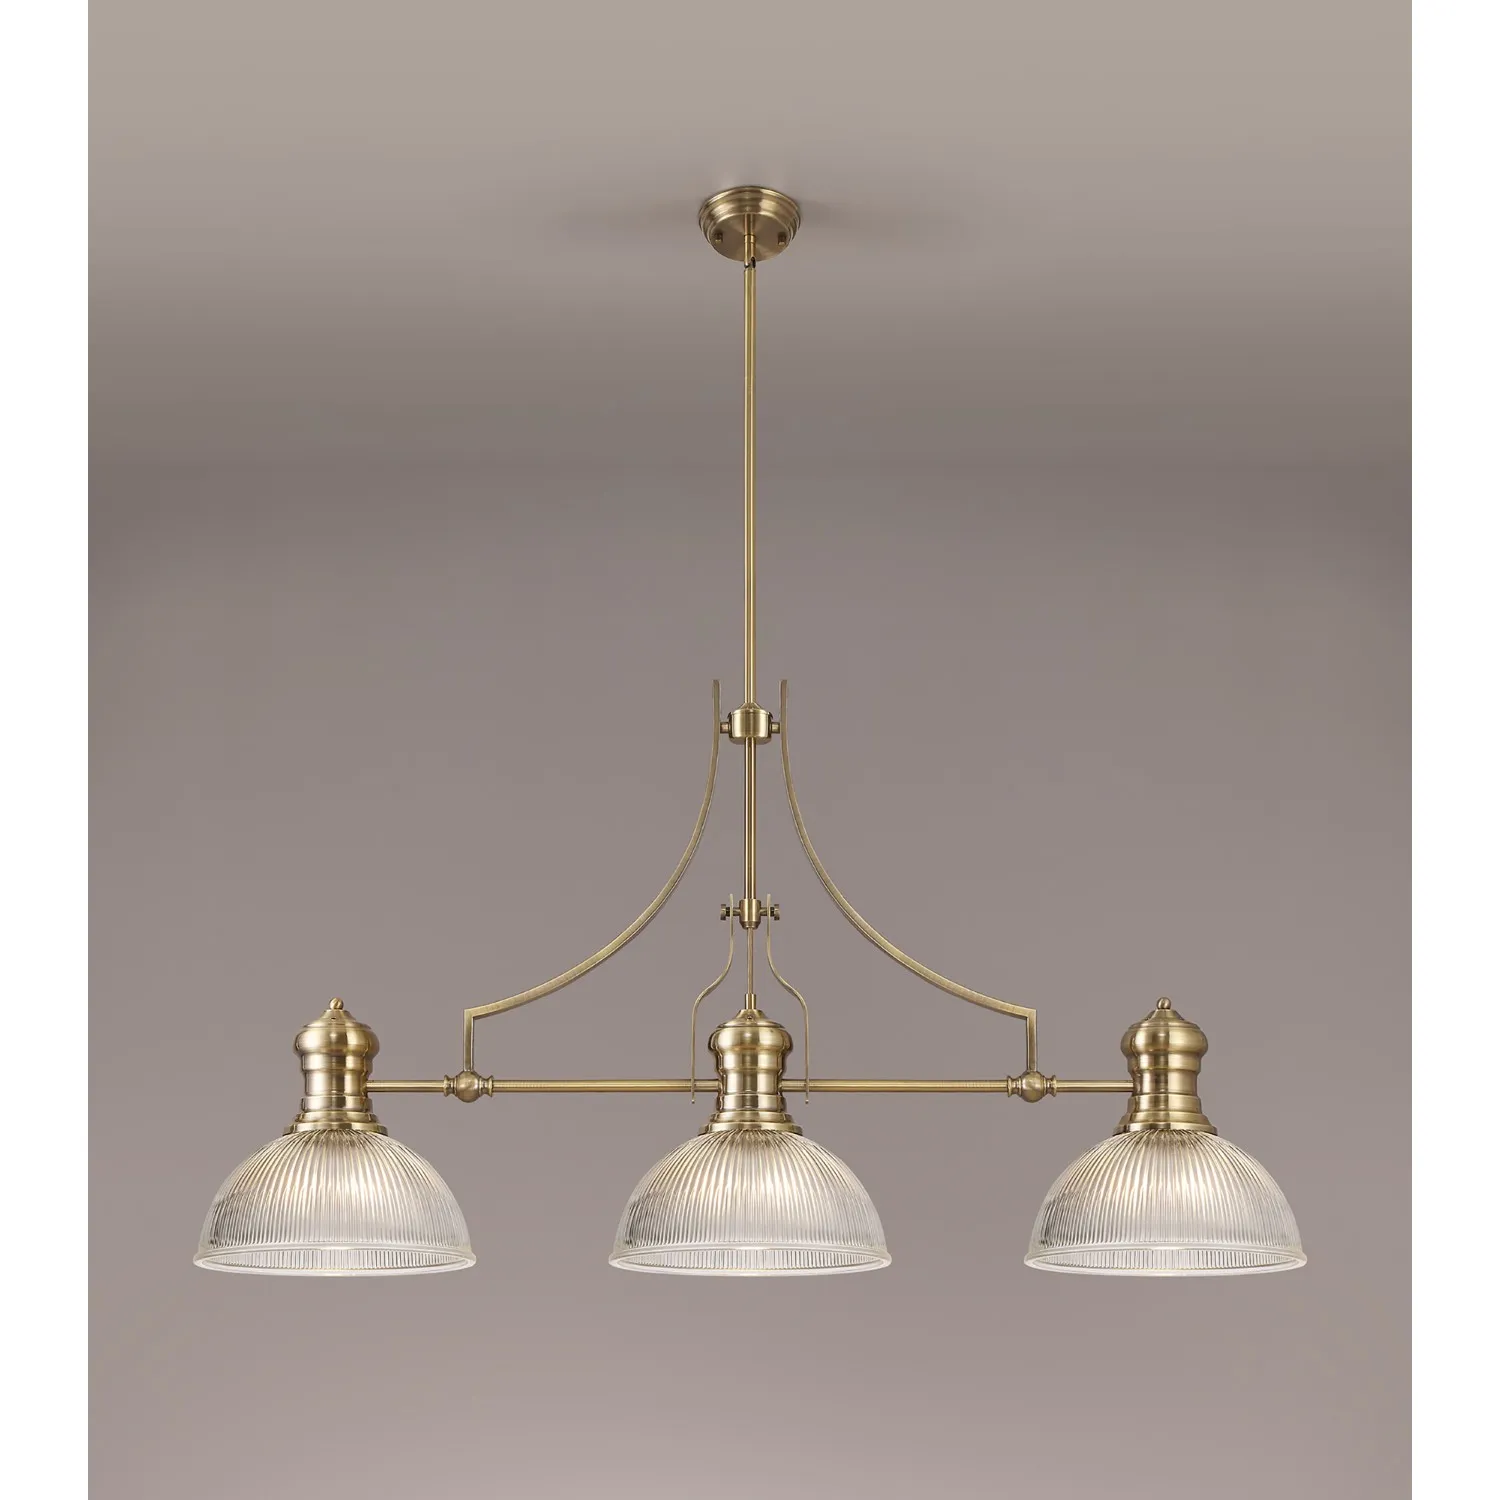 Sandy 3 Light Linear Pendant E27 With 30cm Dome Glass Shade, Antique Brass, Clear